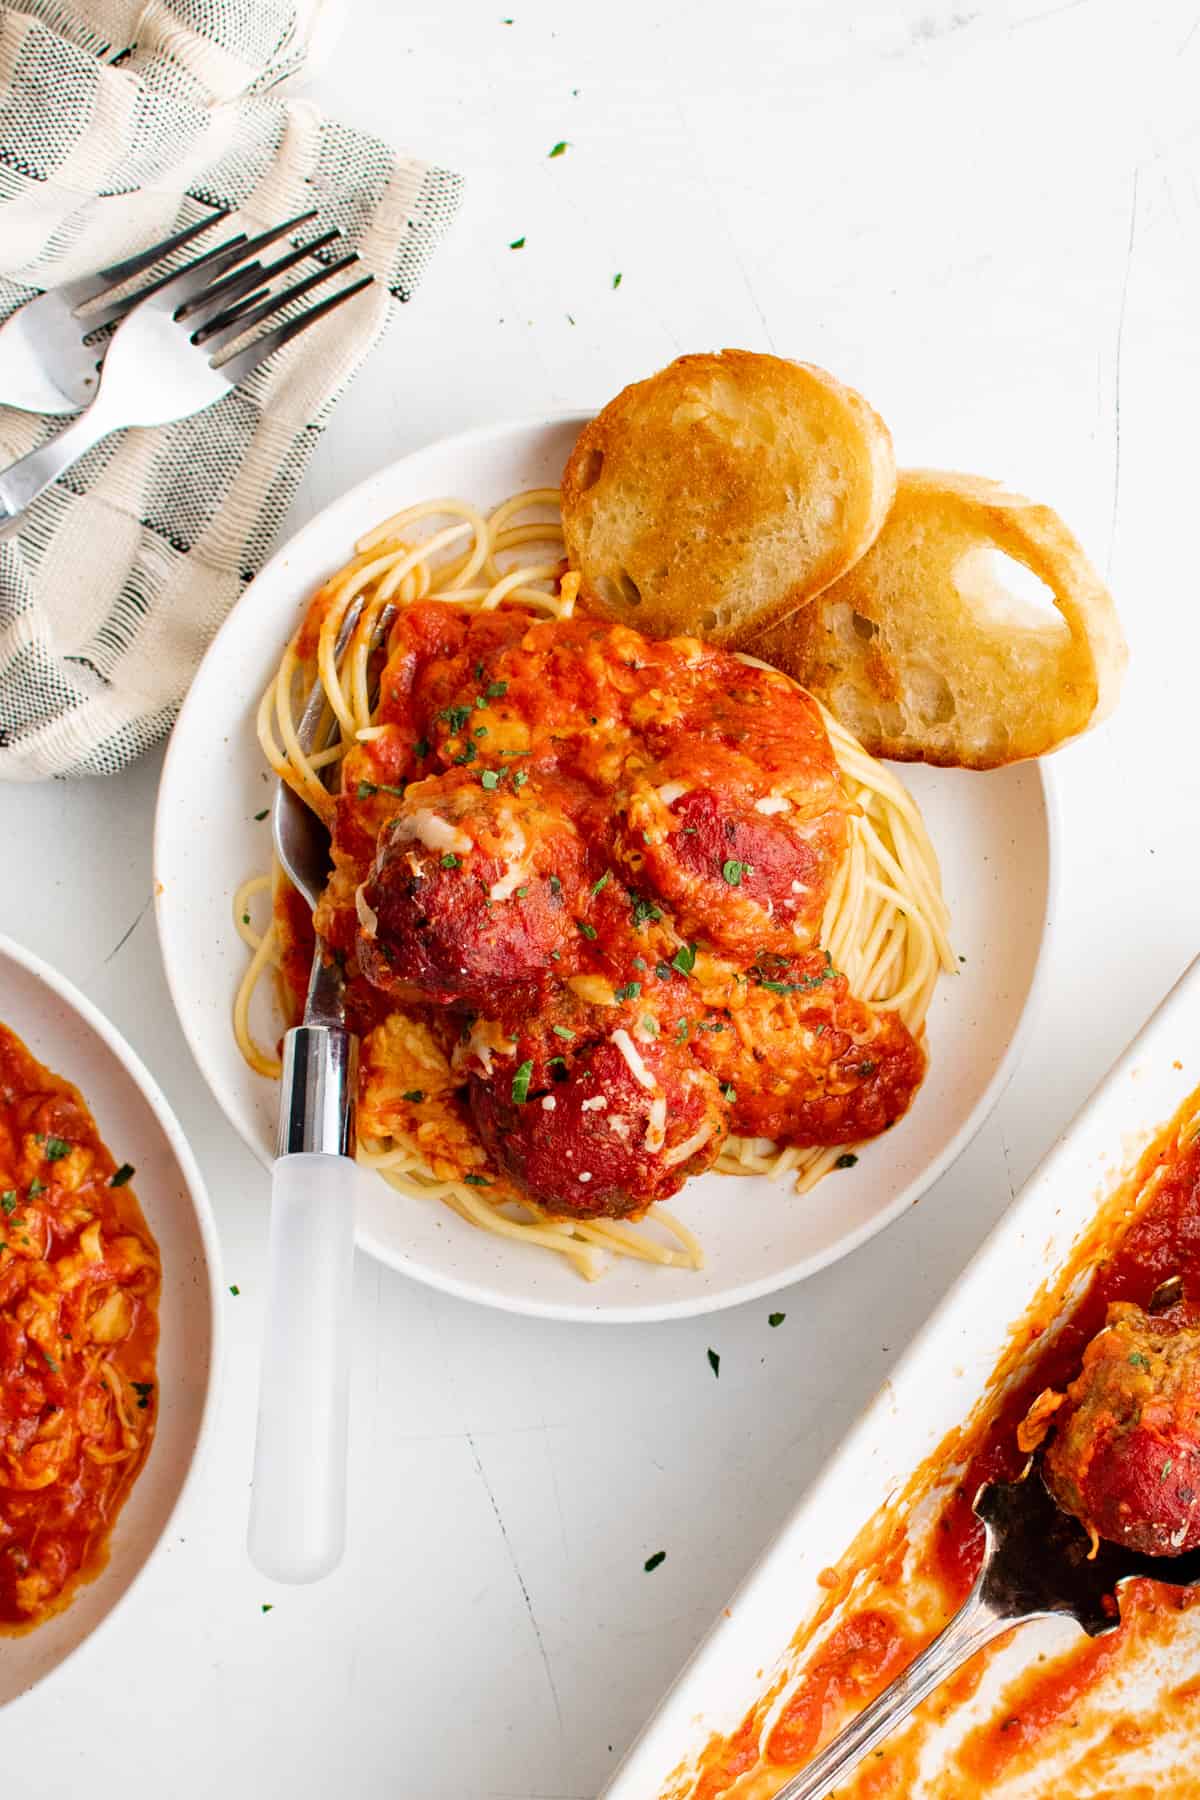 a plate of spaghetti and meatballs casserole on a plate, surrounded by more bowls and serving dishes.